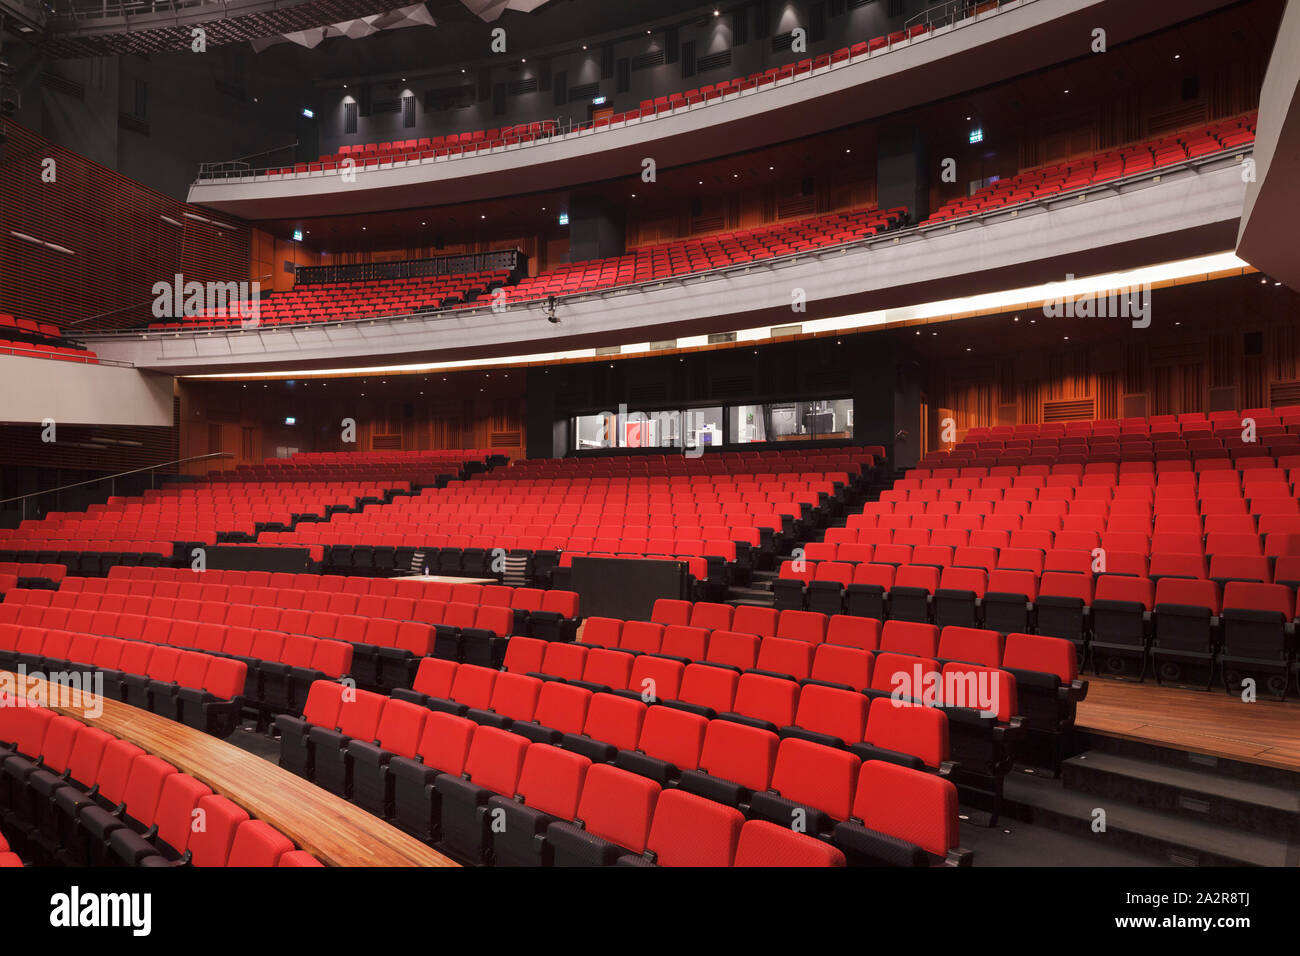 Upper level of auditorium, with red seating. Nieuwe Luxor Theater (New Luxor Theatre), Rotterdam, Netherlands. Architect: Bolles + Wilson, 2001. Stock Photo